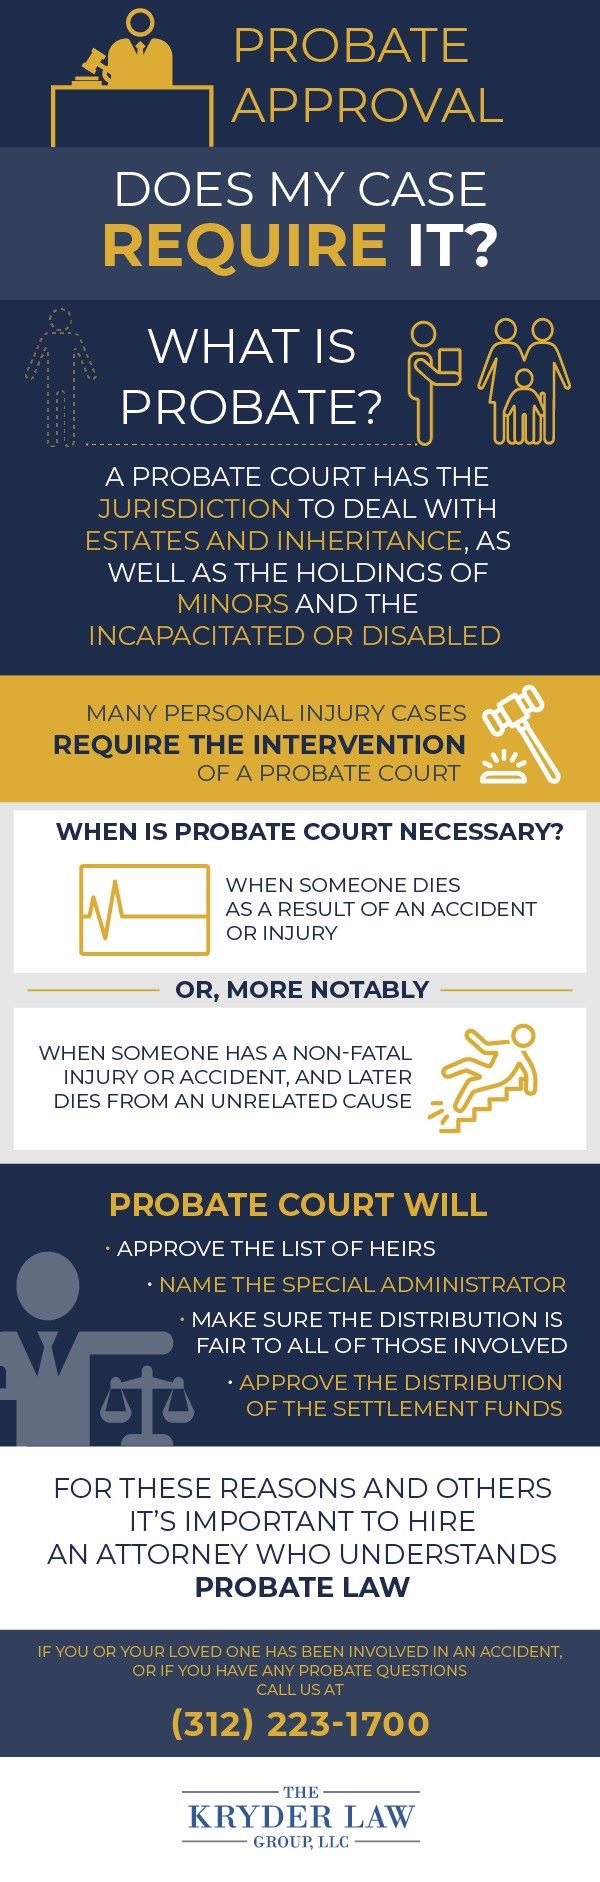 Probate Court FAQs Infographic